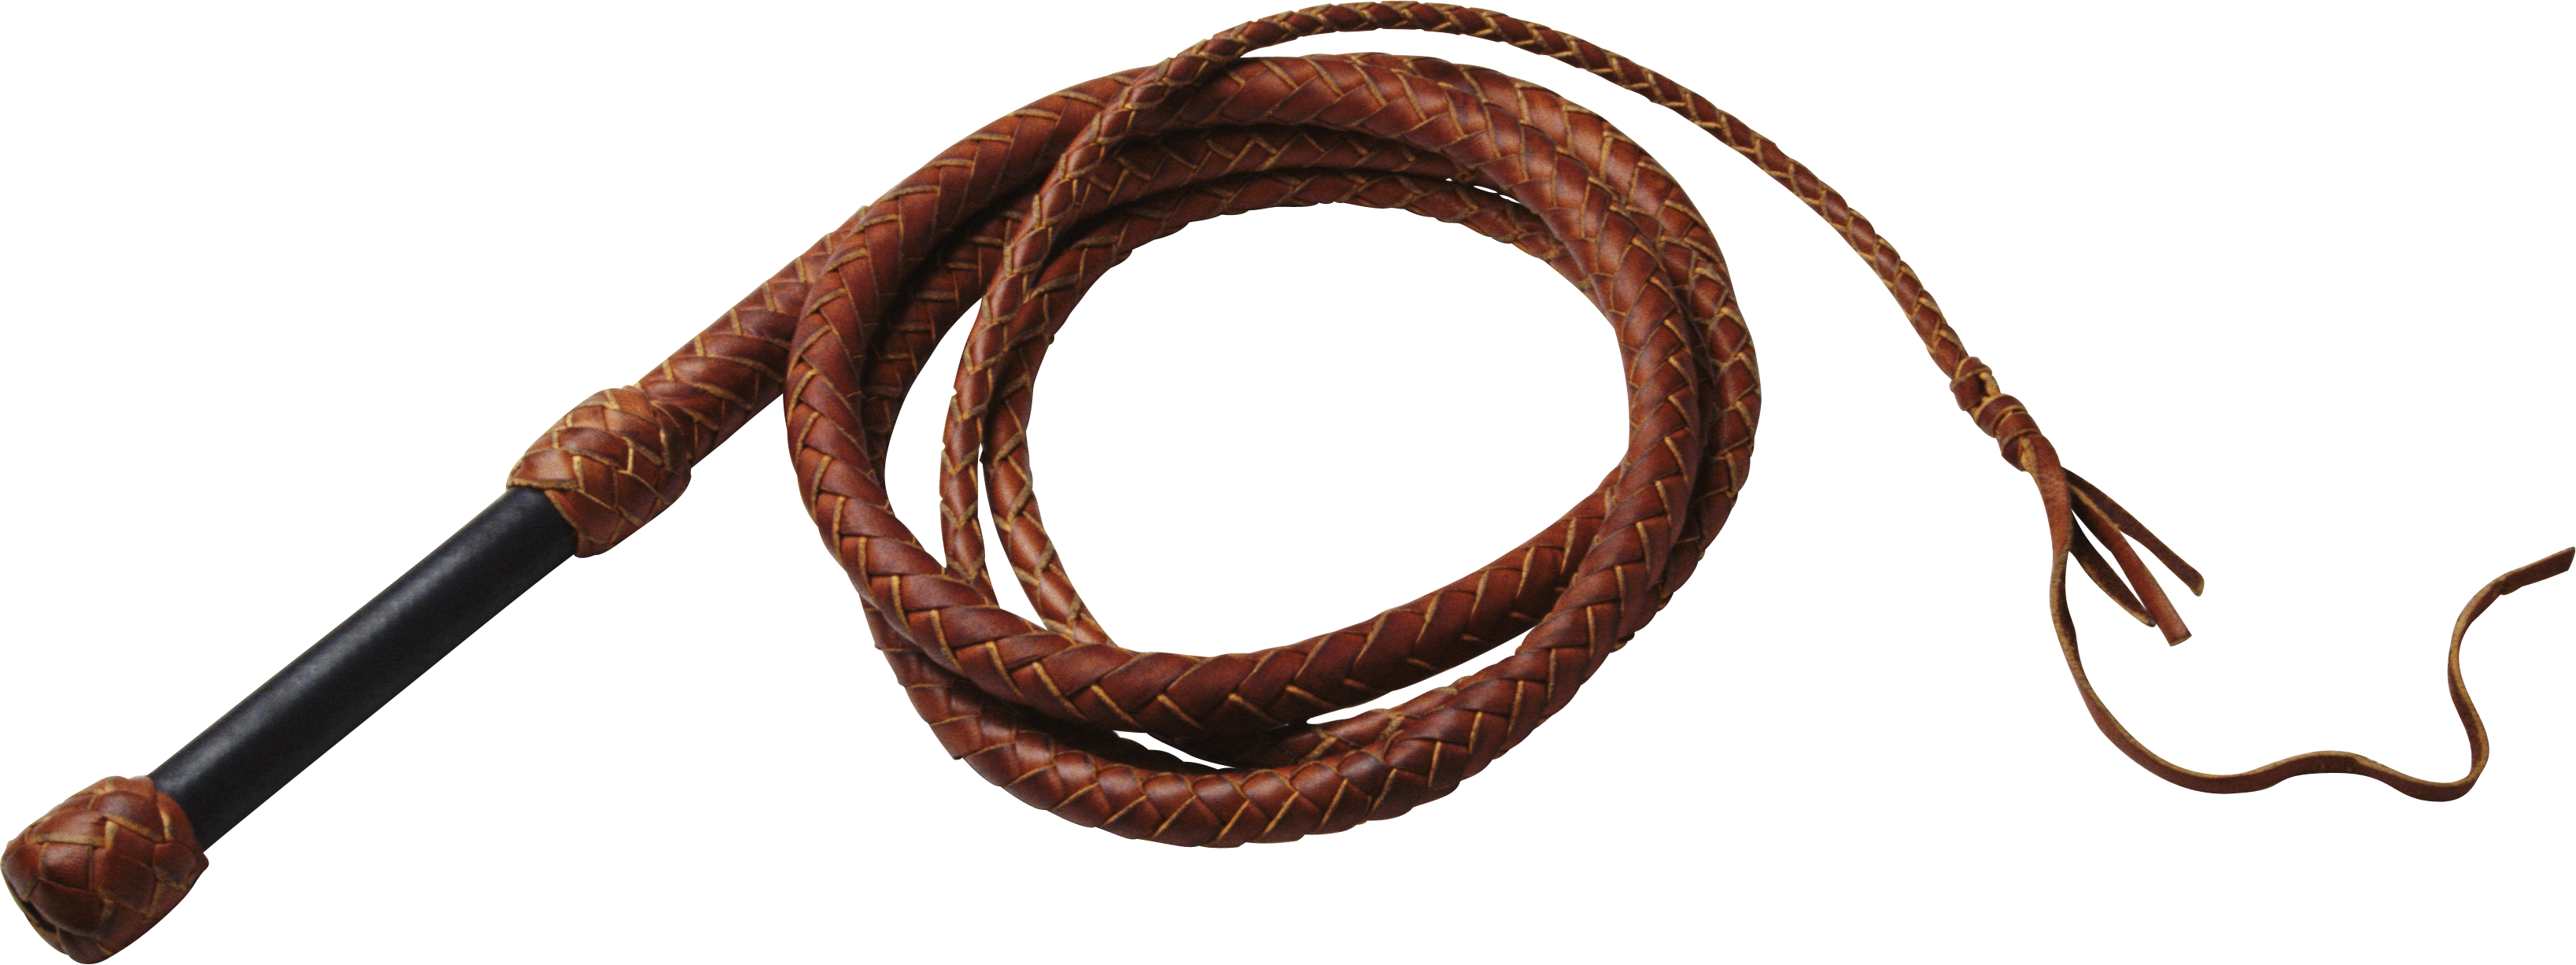 Whip clipart leather whip. Png images free download